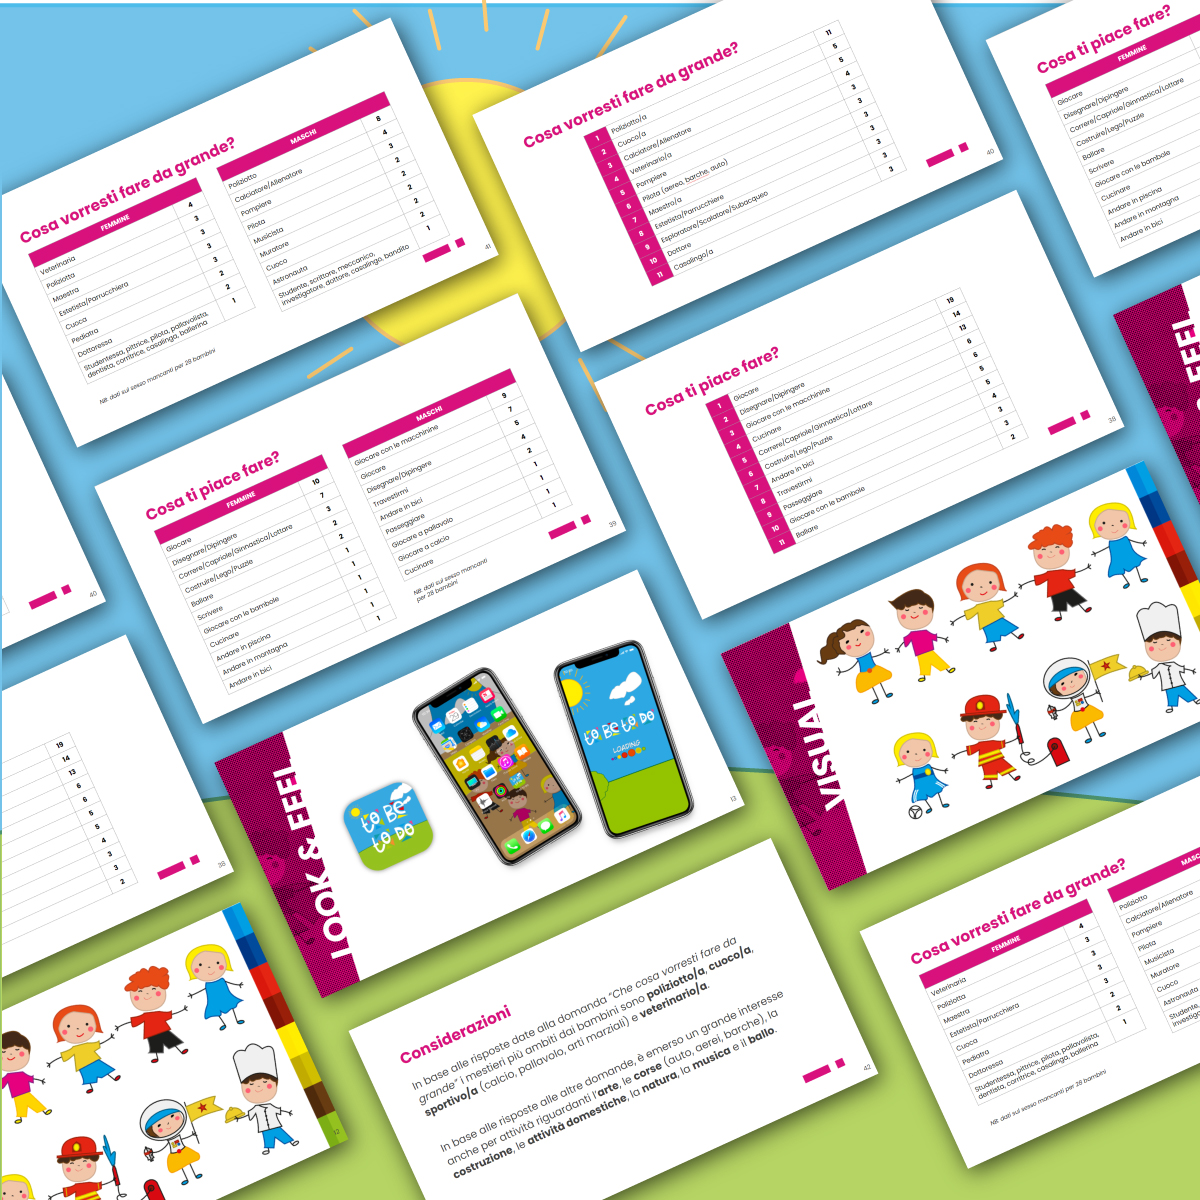 Colourful Children educational game design research-analysis